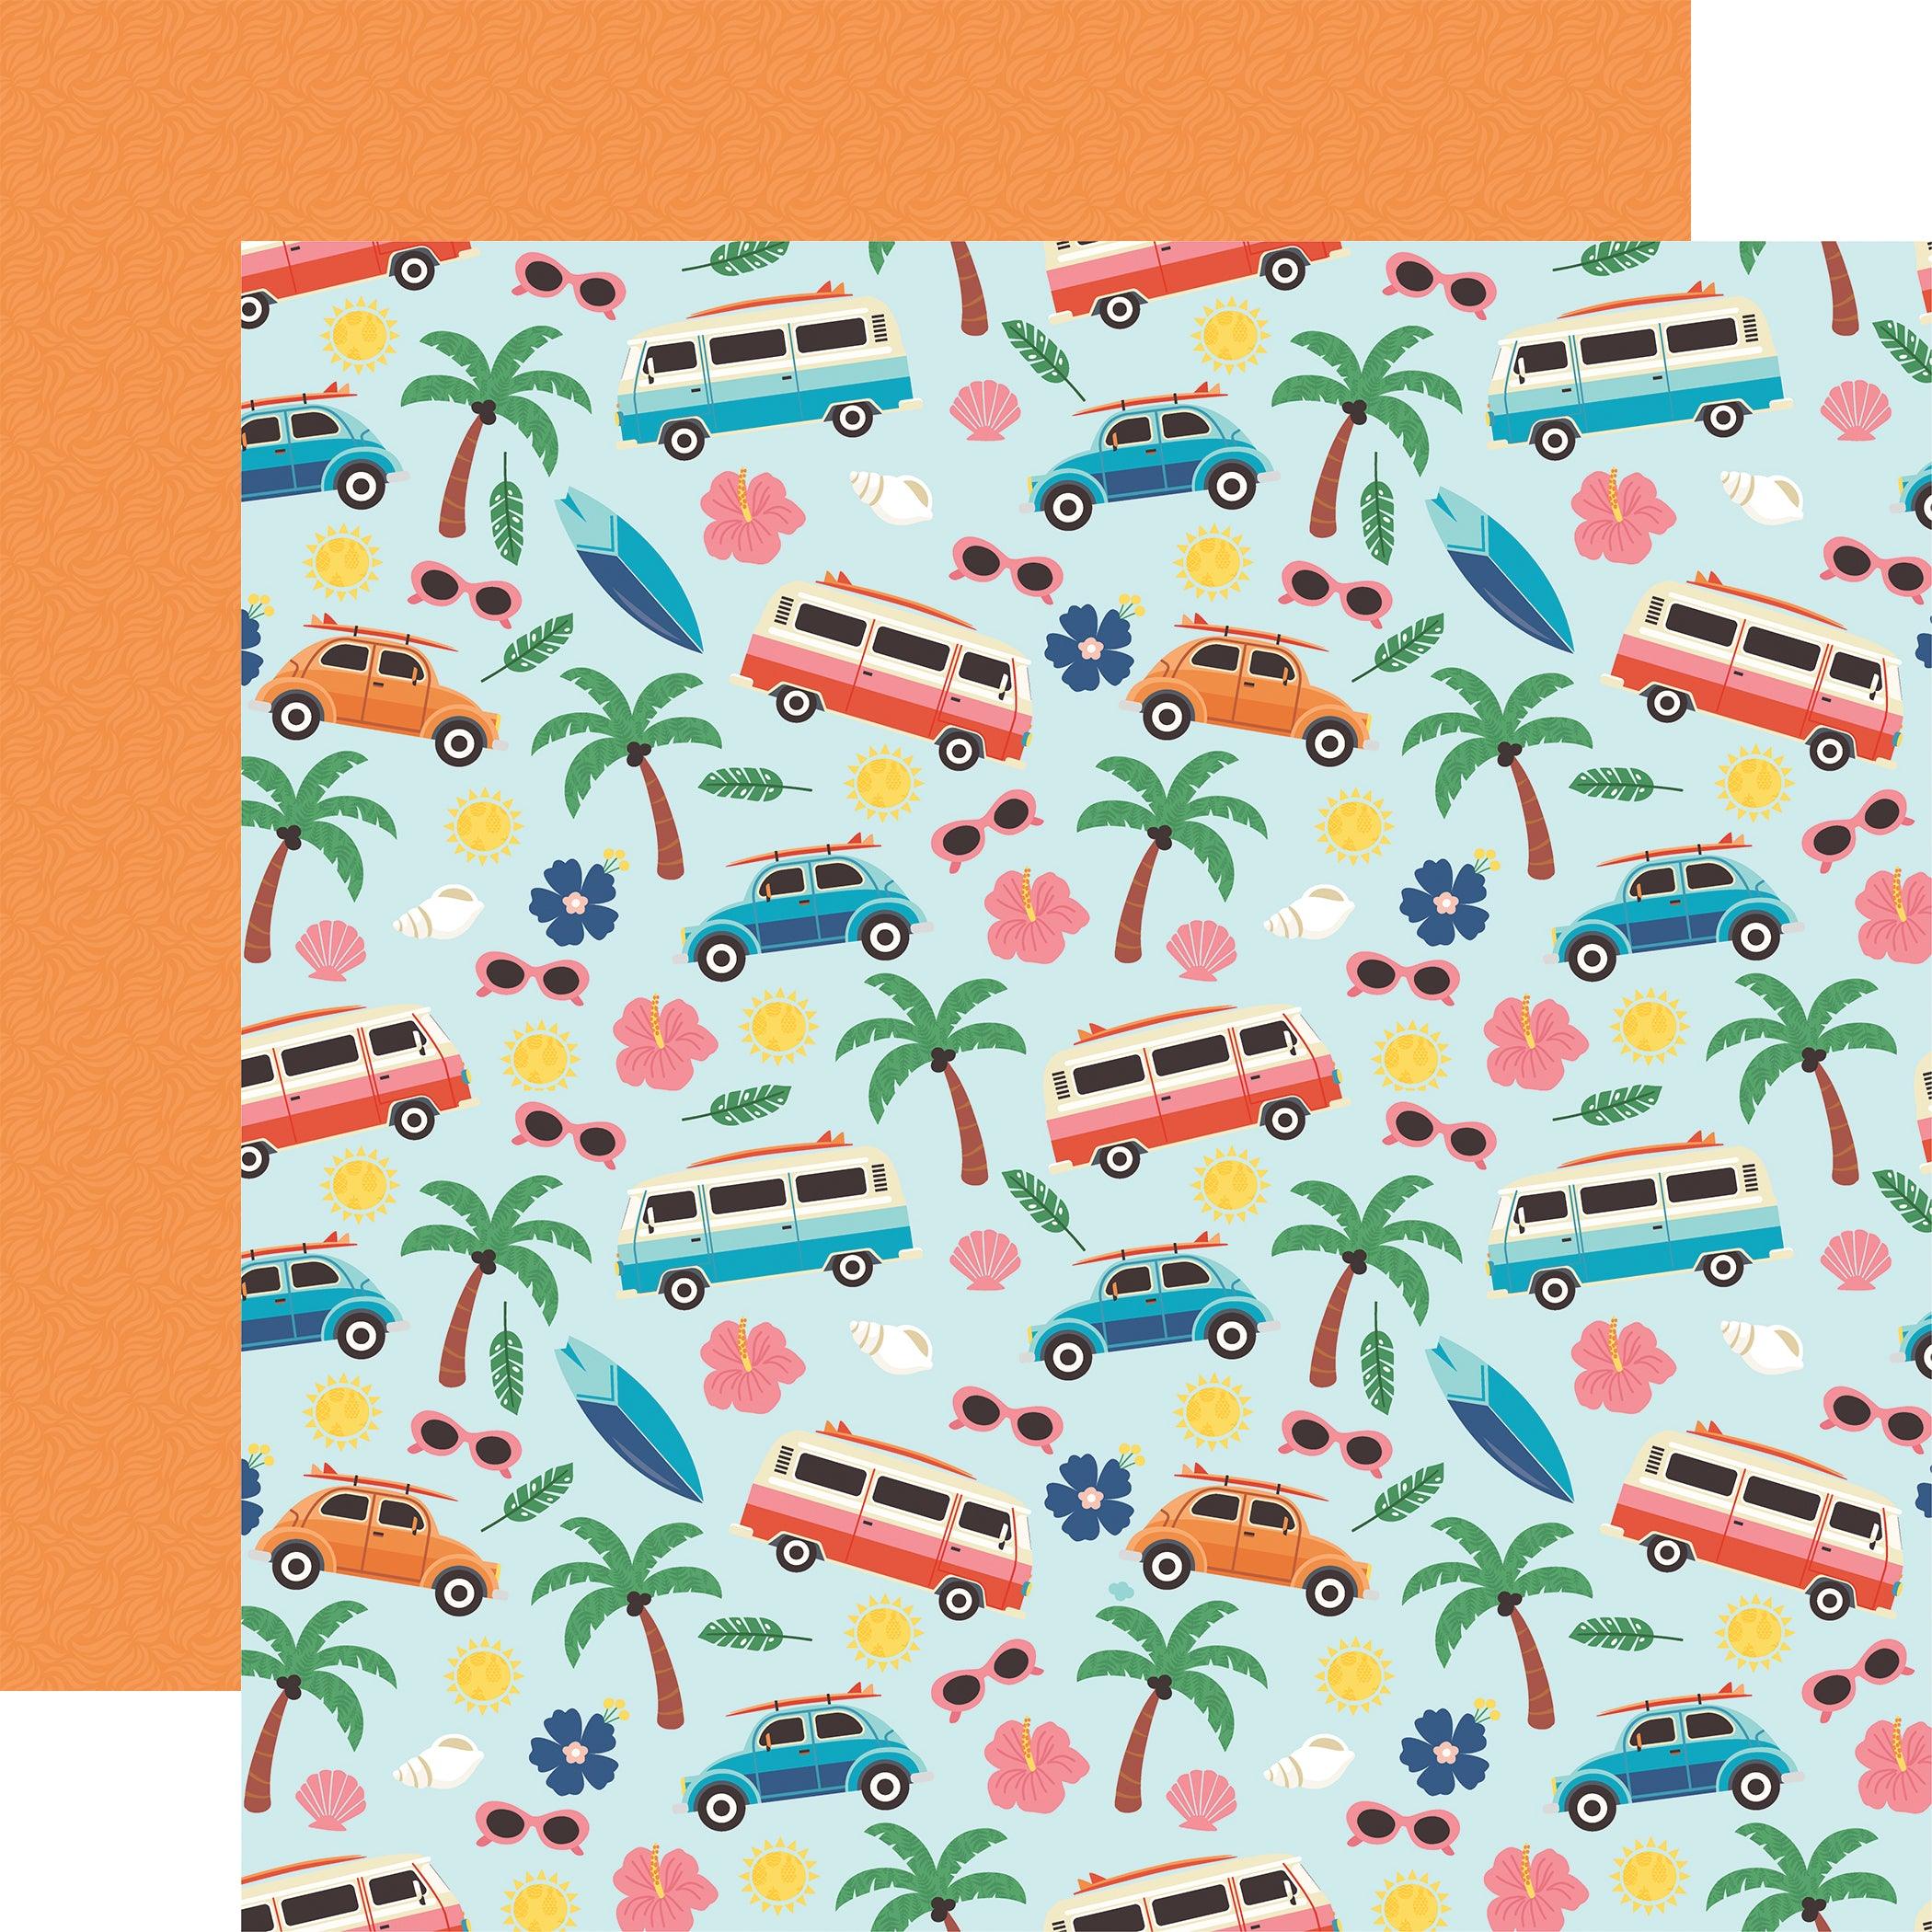 Endless Summer Collection Summer Vibes 12 x 12 Double-Sided Scrapbook Paper by Echo Park Paper - Scrapbook Supply Companies